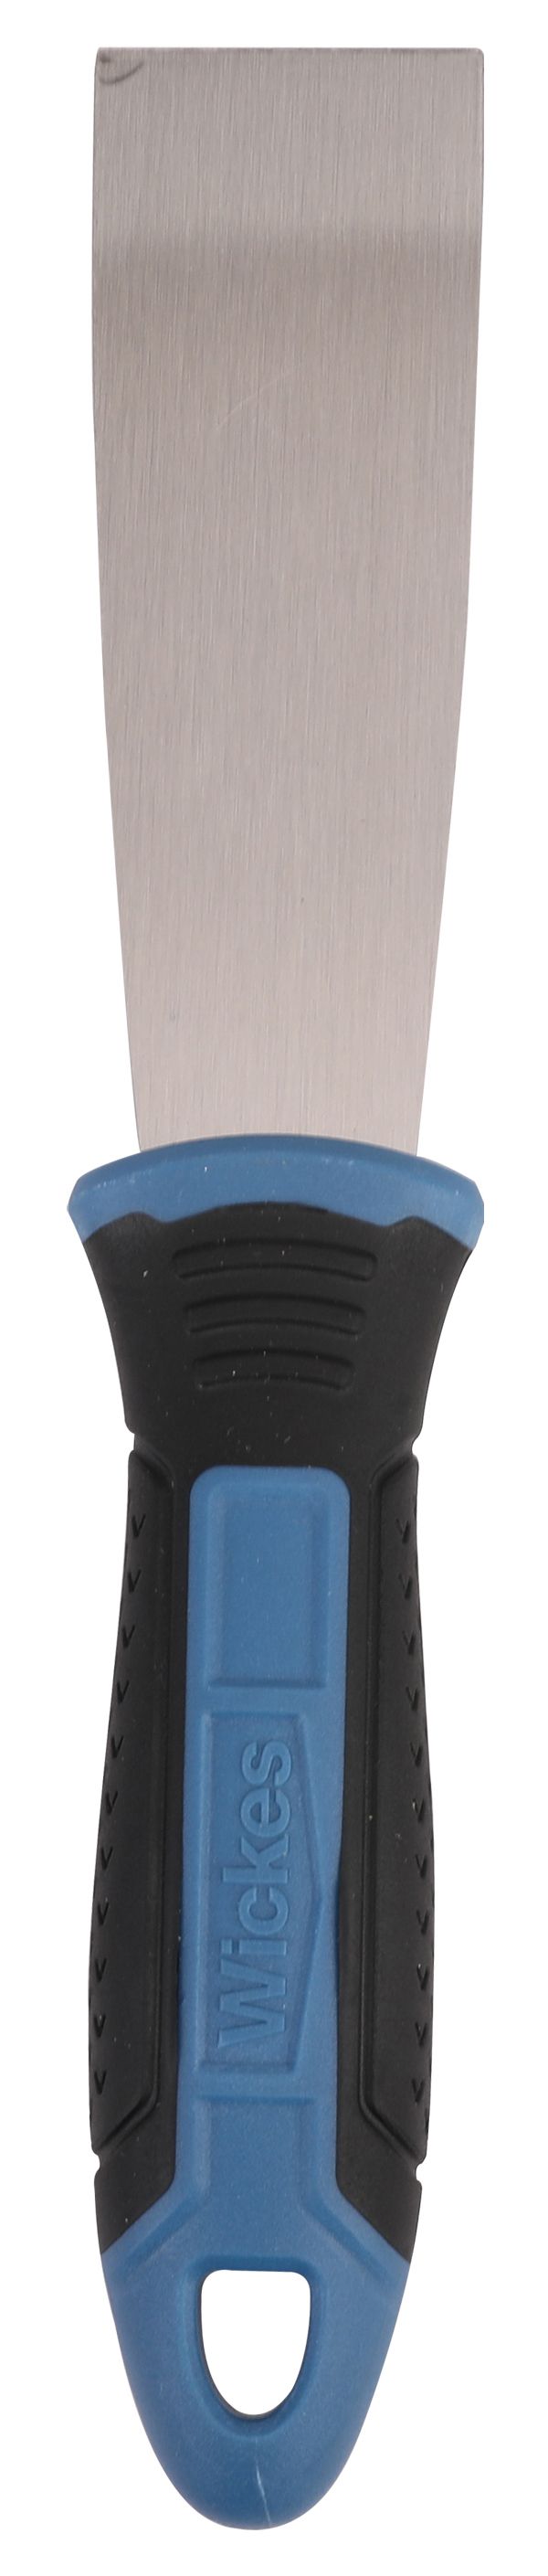 All Purpose Chisel Knife - 38mm